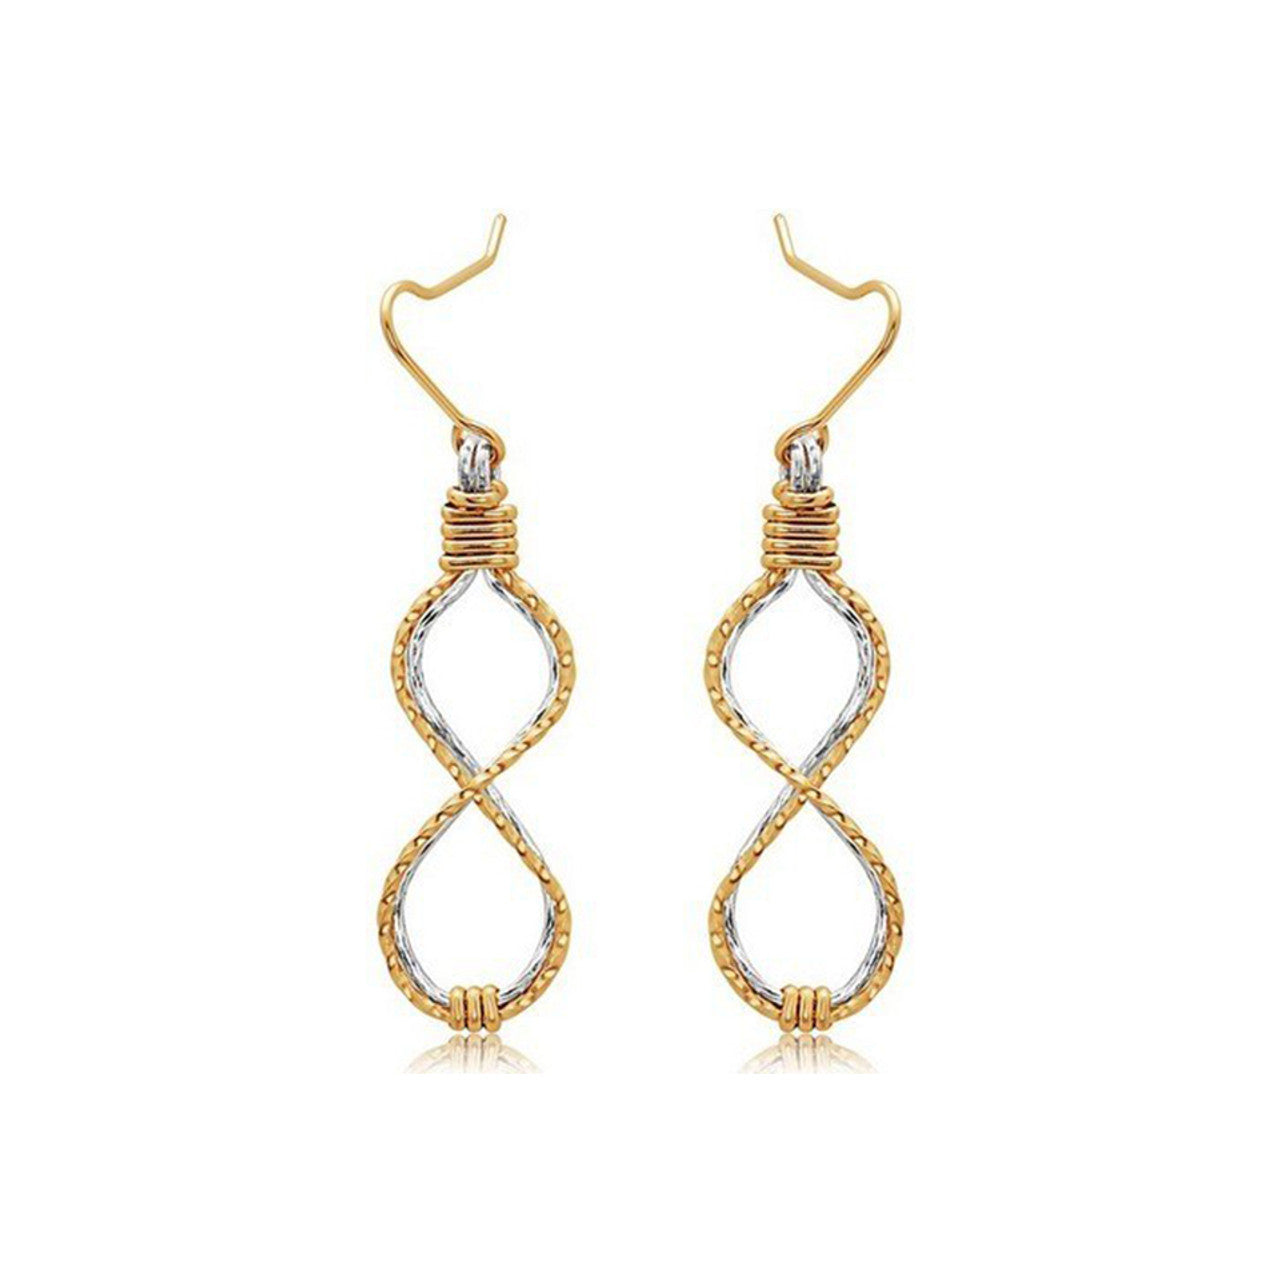 Ronaldo Earrings Infinity 14K Gold and Sterling Silver